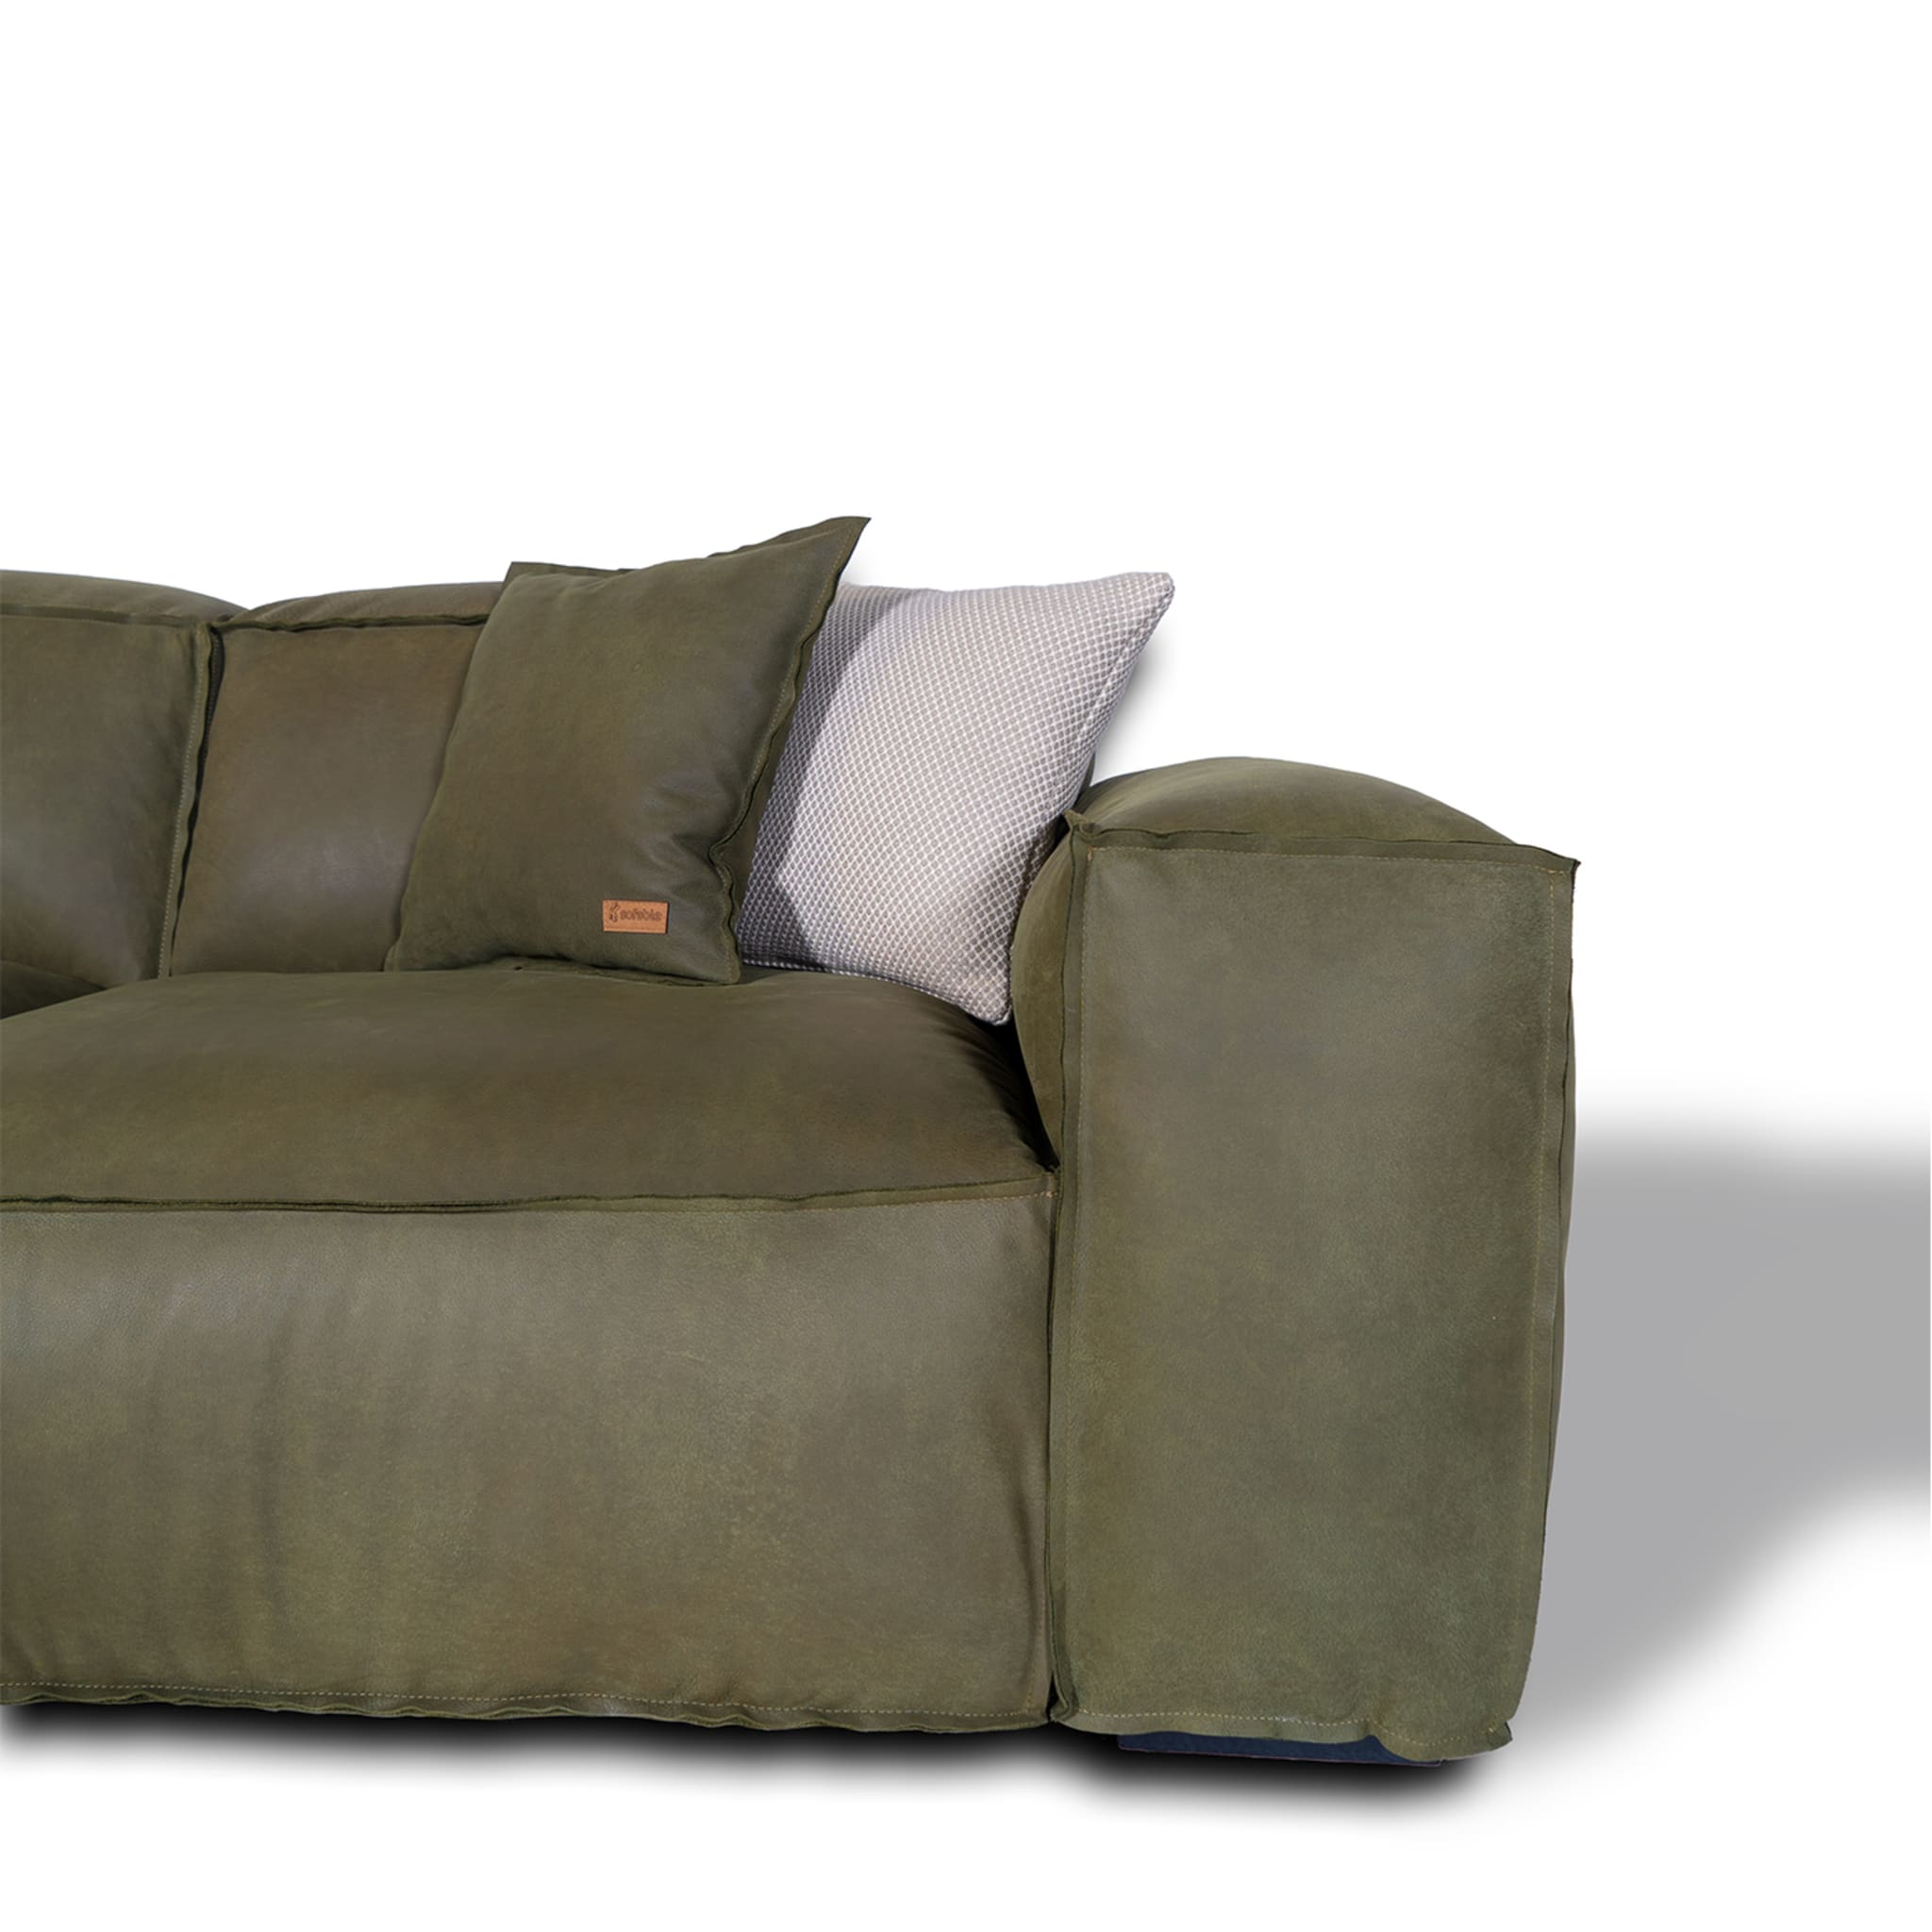 Placido Green Leather 2-Seater Maxi Sofa Tribeca collection - Alternative view 2